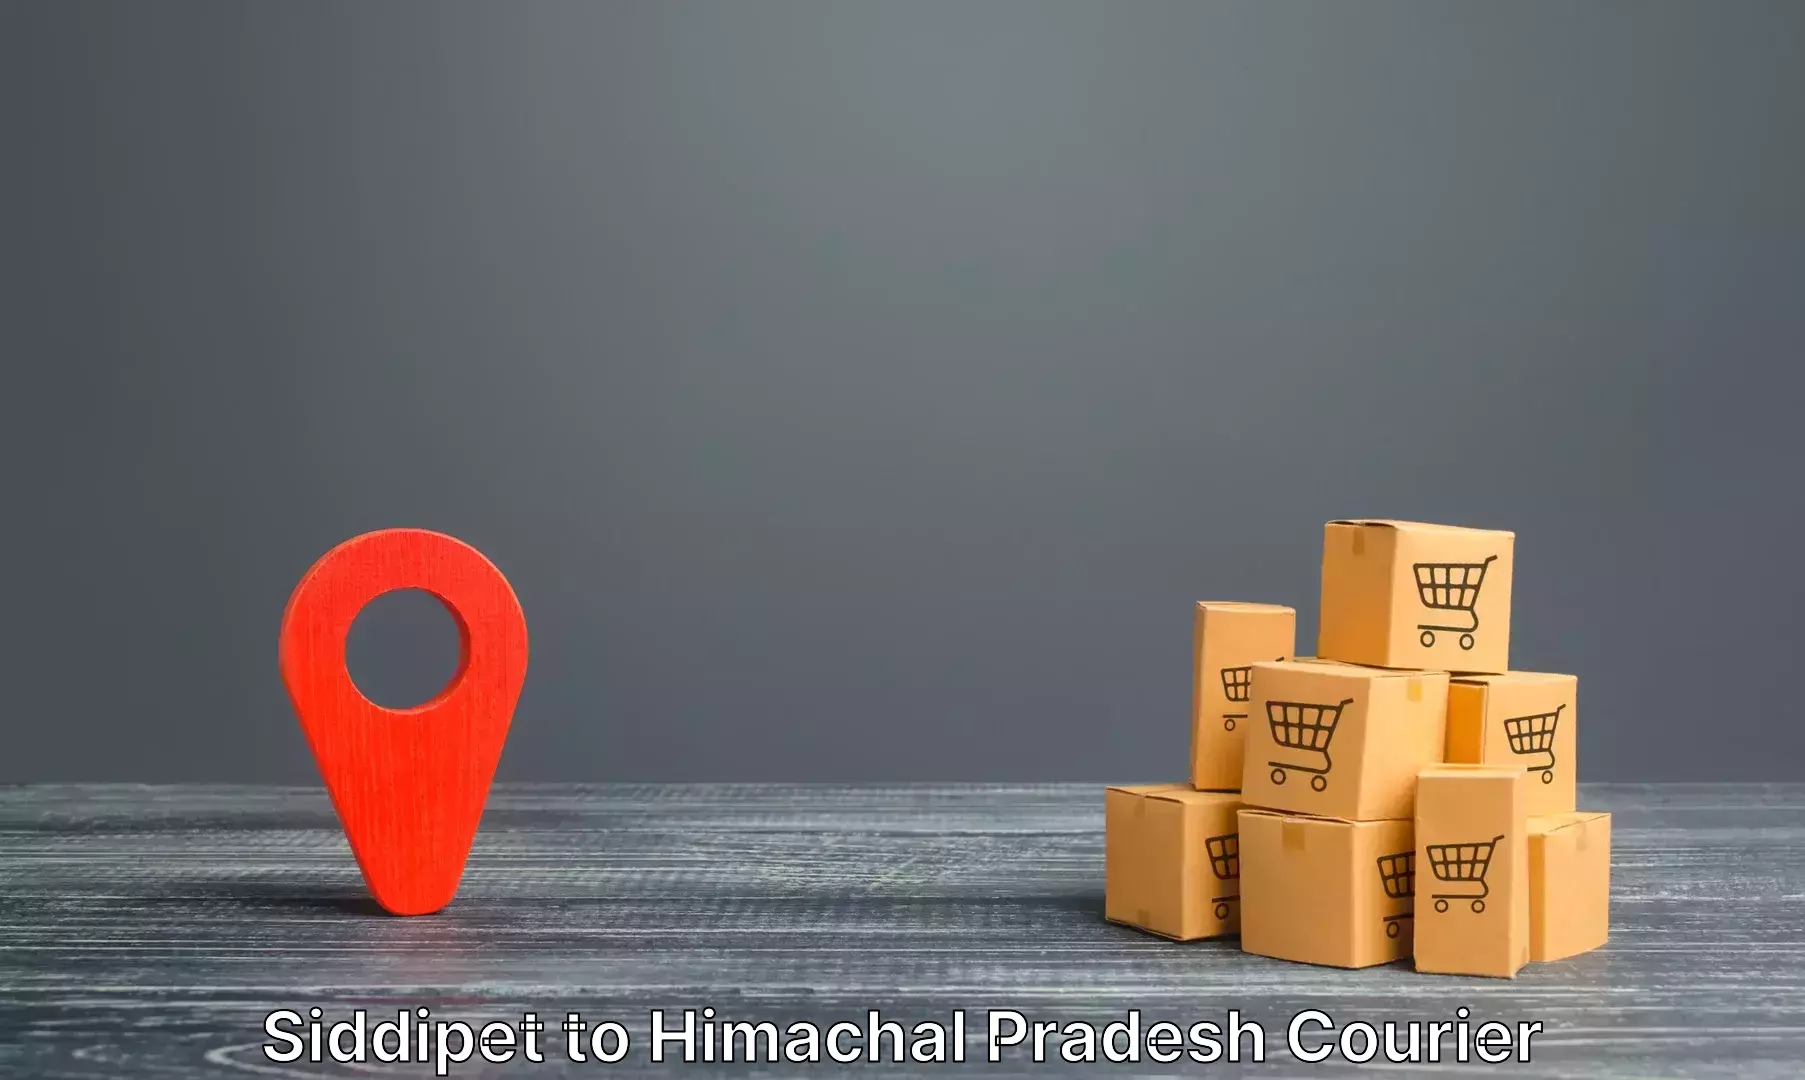 Luggage shipping consultation Siddipet to Dheera